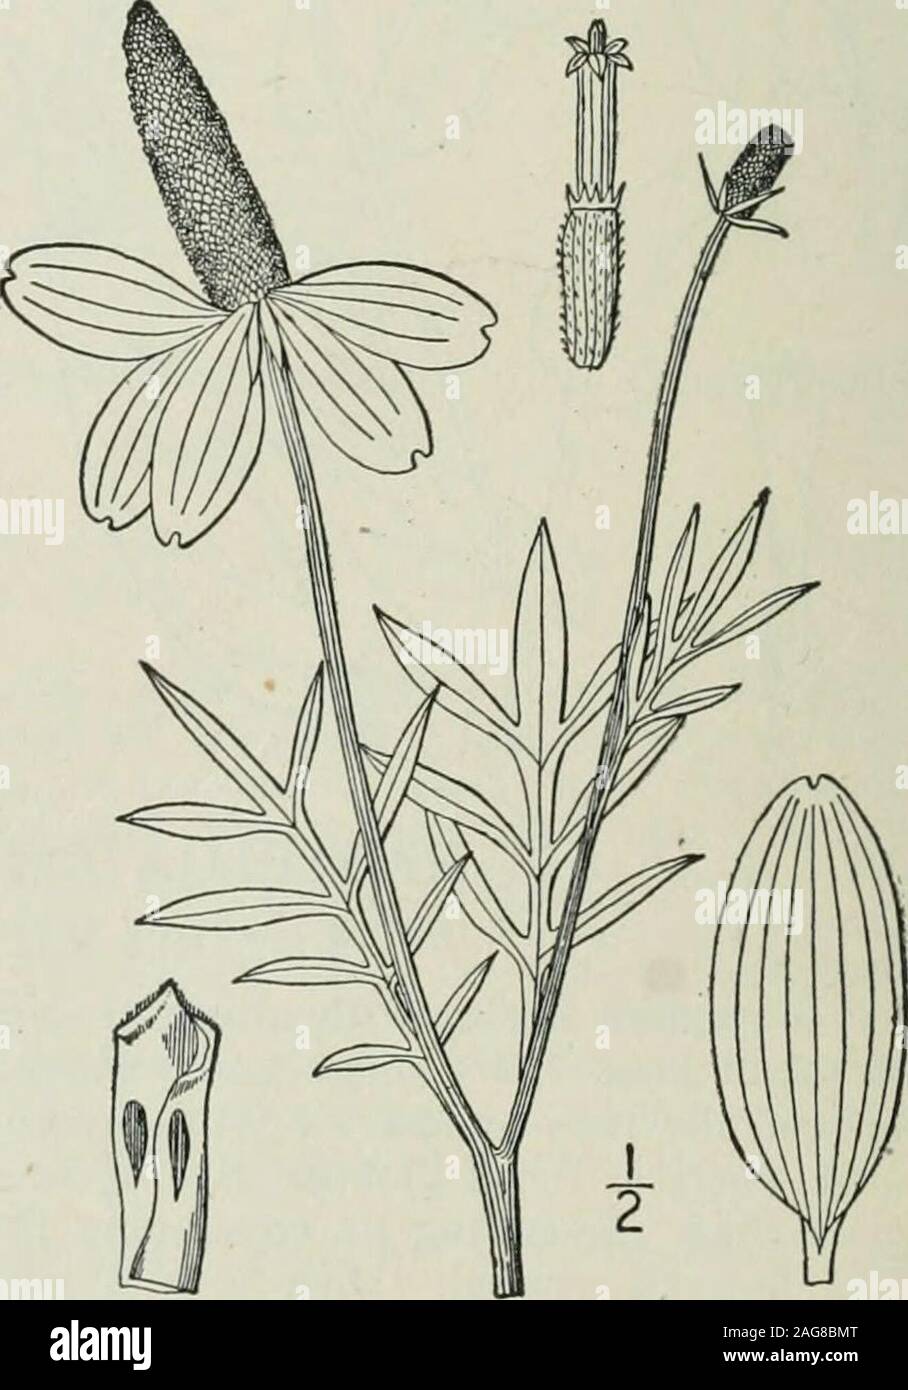 . An illustrated flora of the northern United States, Canada and the British possessions : from Newfoundland to the parallel of the southern boundary of Virginia and from the Atlantic Ocean westward to the 102nd meridian. .Lepachys columnaris T. & G. Fl. N. A. 2: 313. 1842.Lepachys columnaris var. pulcherrima T. & G. loc. cit. 1842. Strigose-pubescent and scabrous; stem slender,usually branched, i°-2*° high. Leaves thick, pin-nately divided into linear or linear-oblong, acute orobtuse, entire dentate or cleft segments, the caulineshort-petioled or sessile, 2-4 long, the basal onessometimes obl Stock Photo